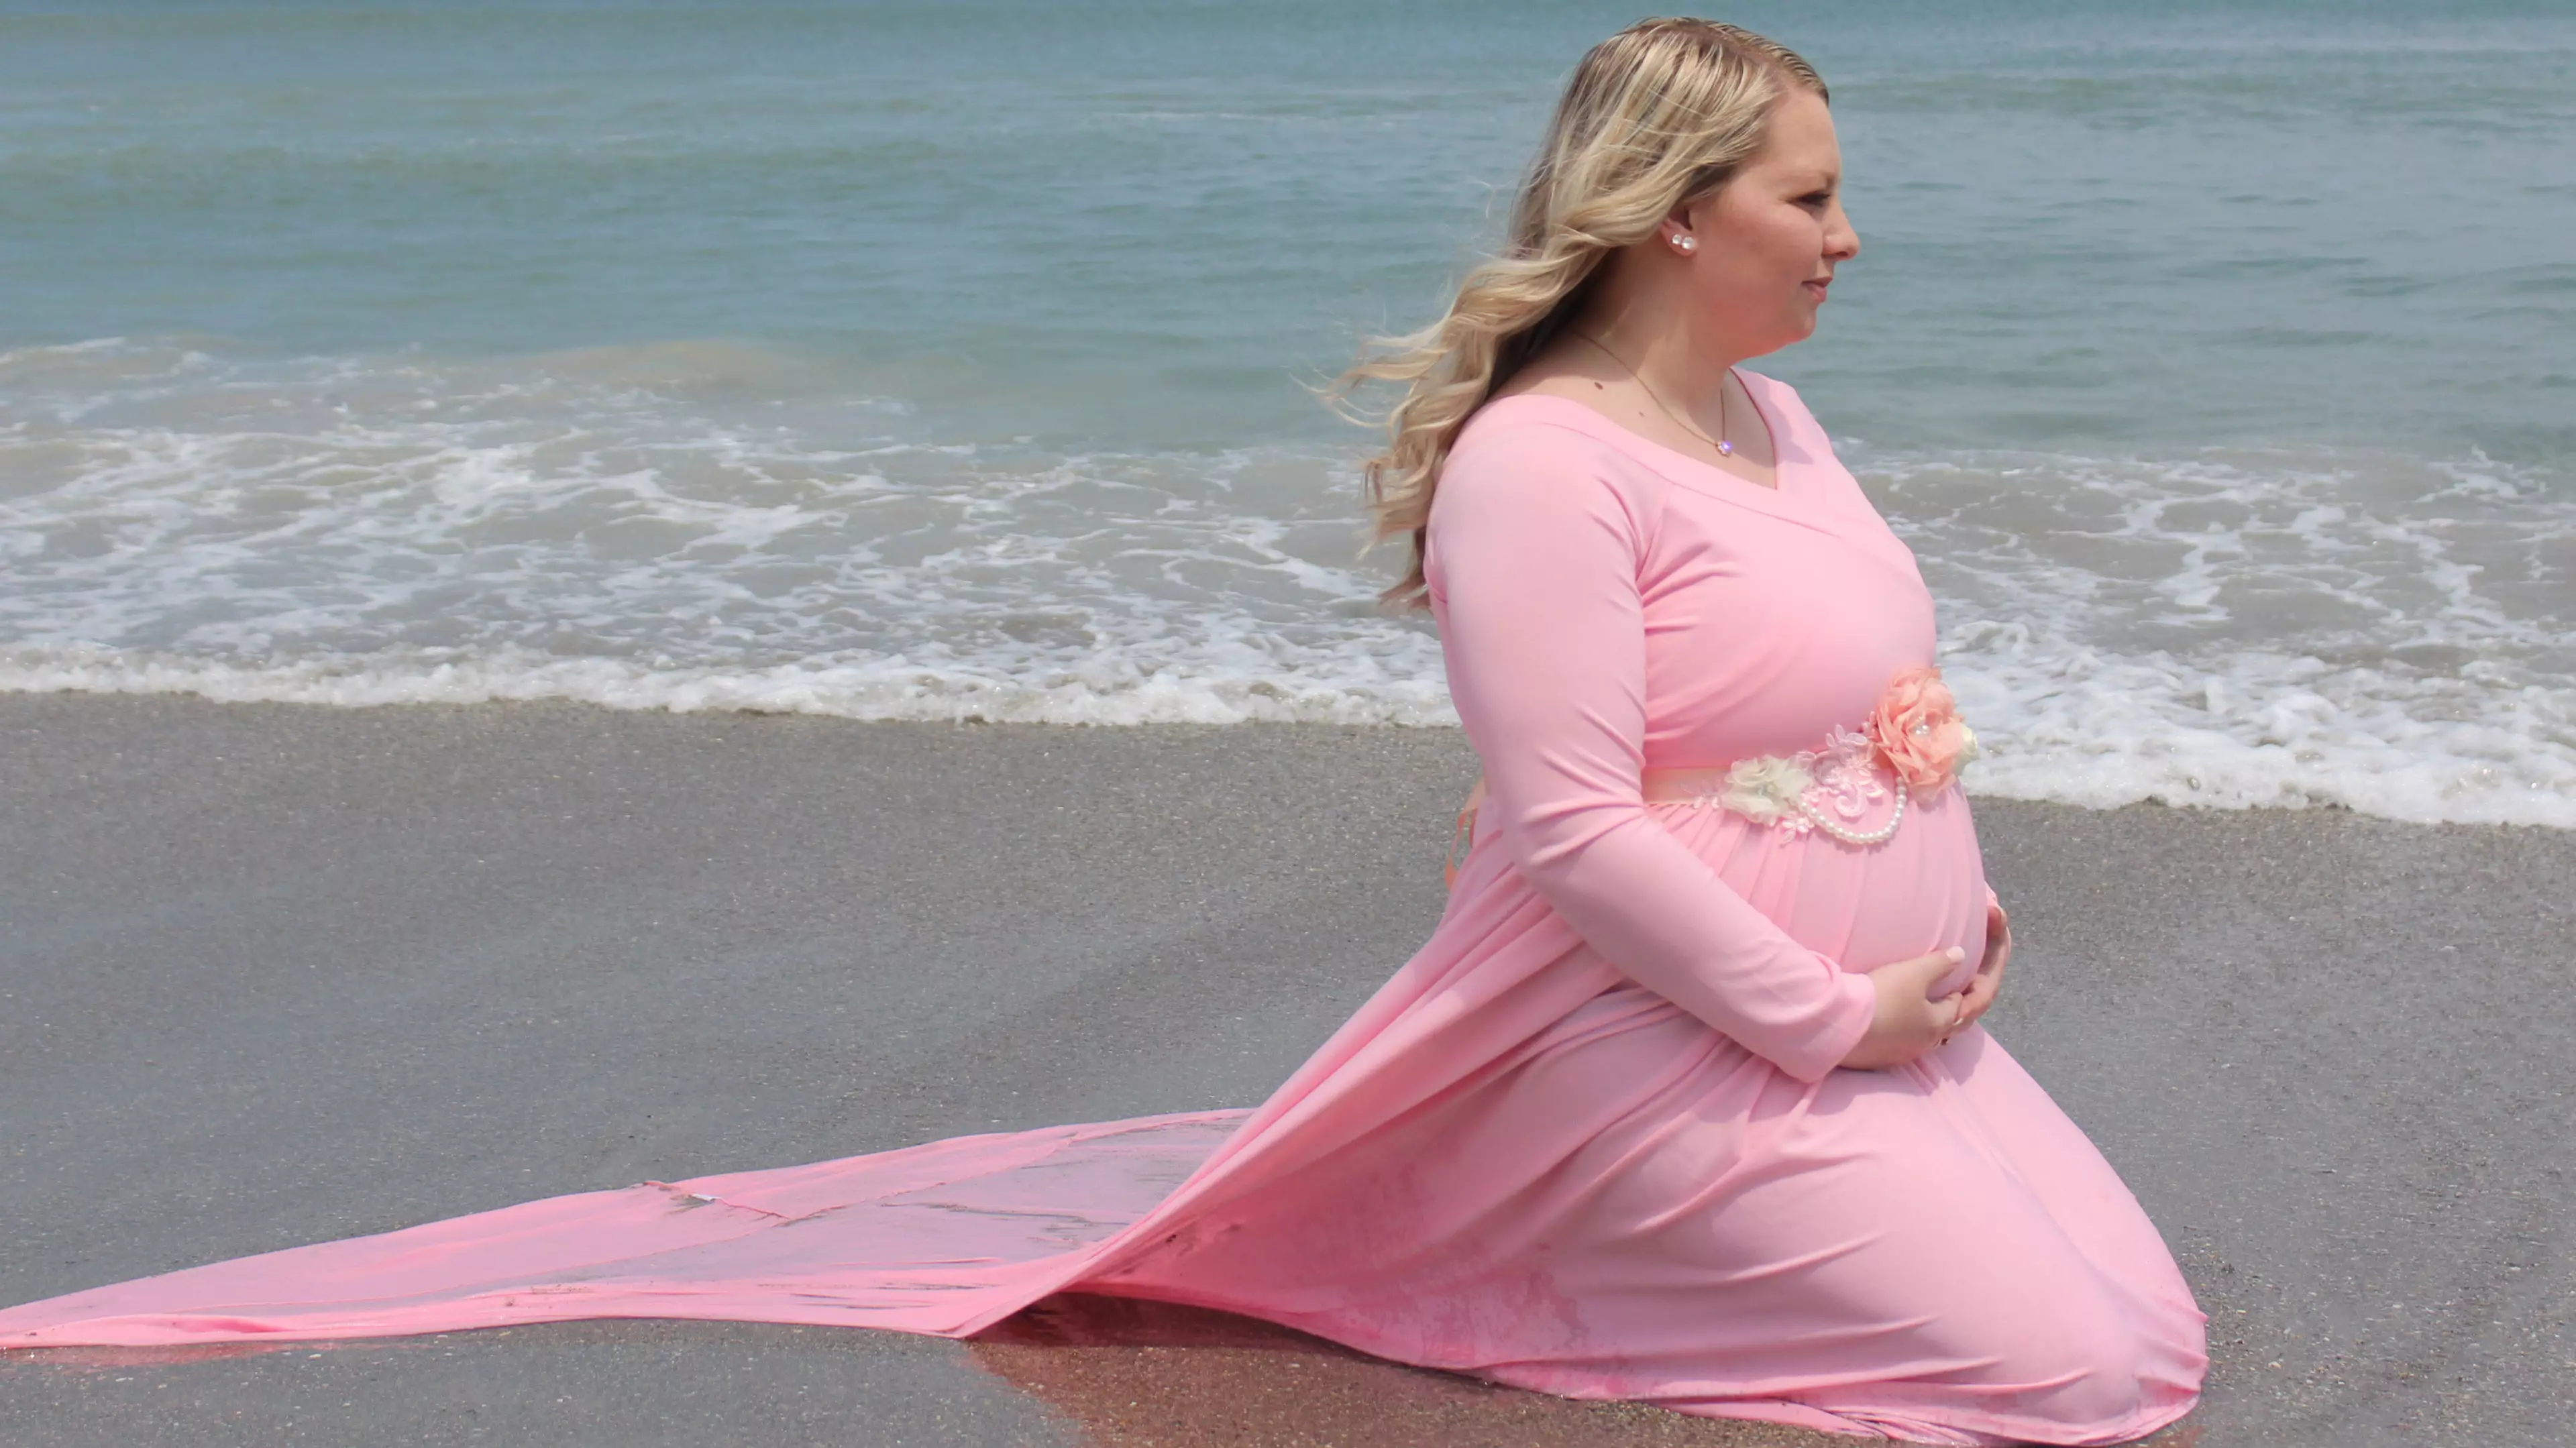 Mum's Maternity Photoshoot Pictures Capture The Moment A Plane Crashes Into The Sea